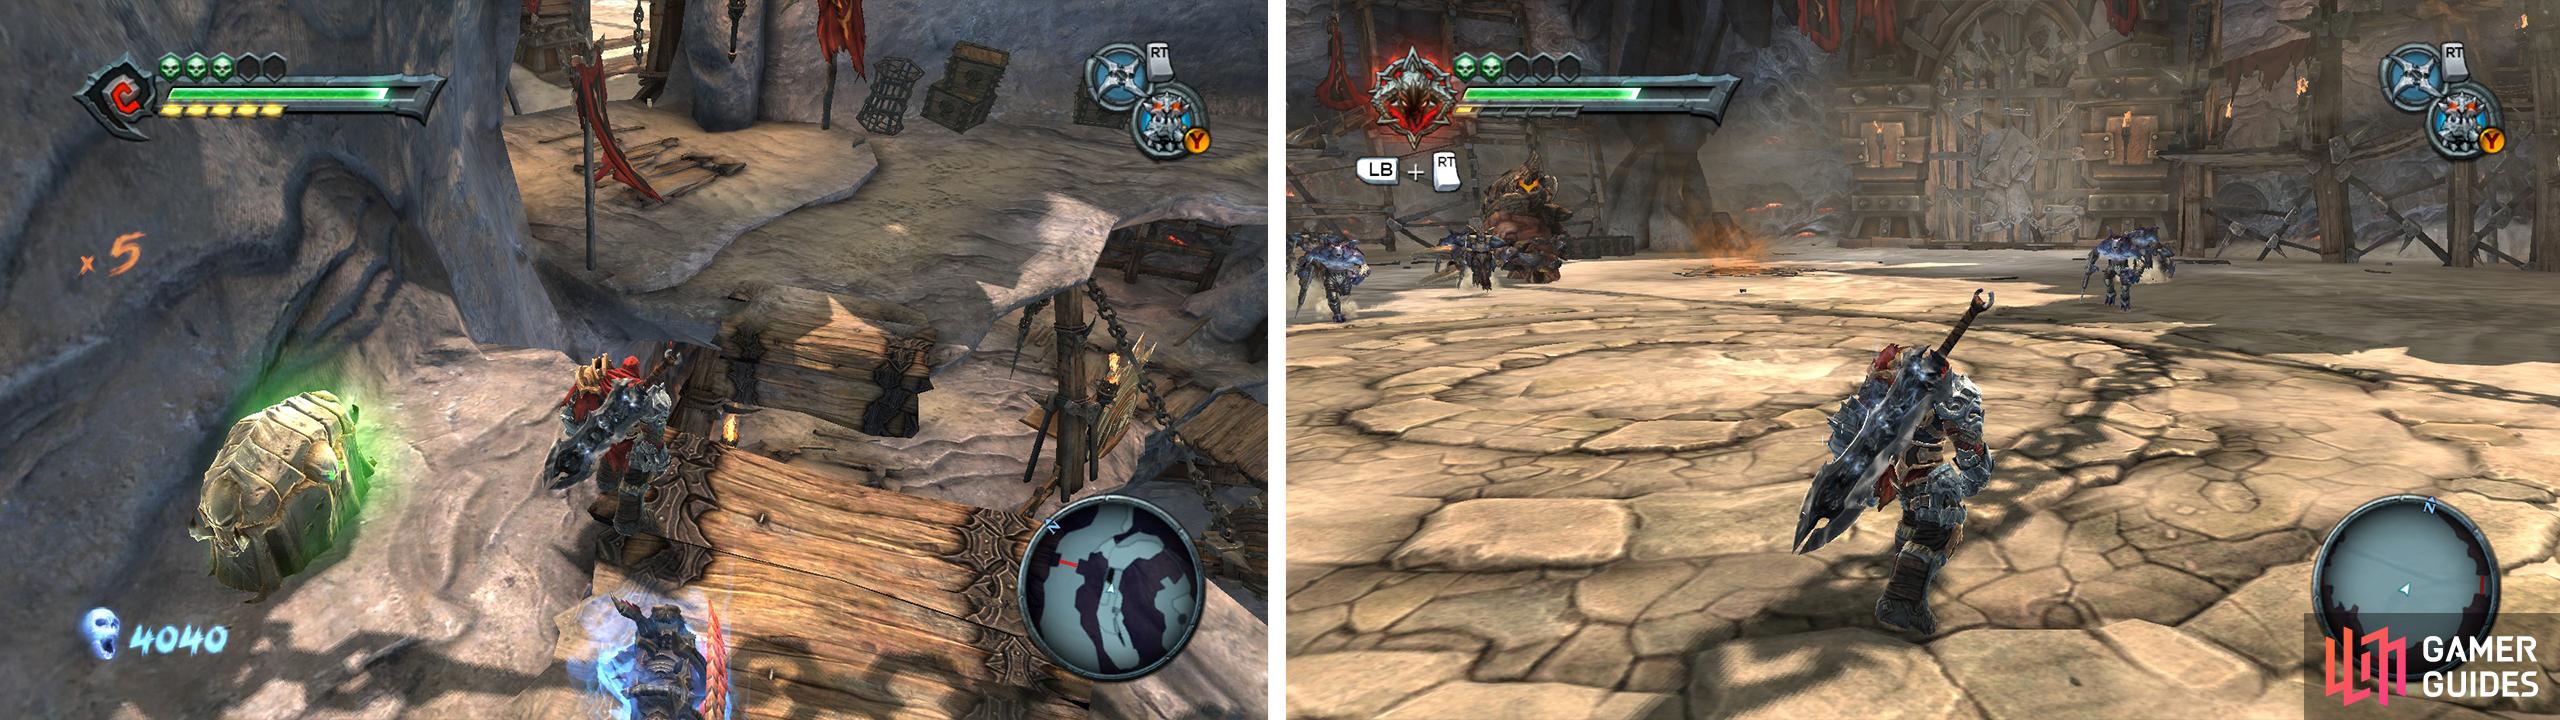 Hop across the gap (left) to enter an Arena area where you’ll need to fight enemies (right).